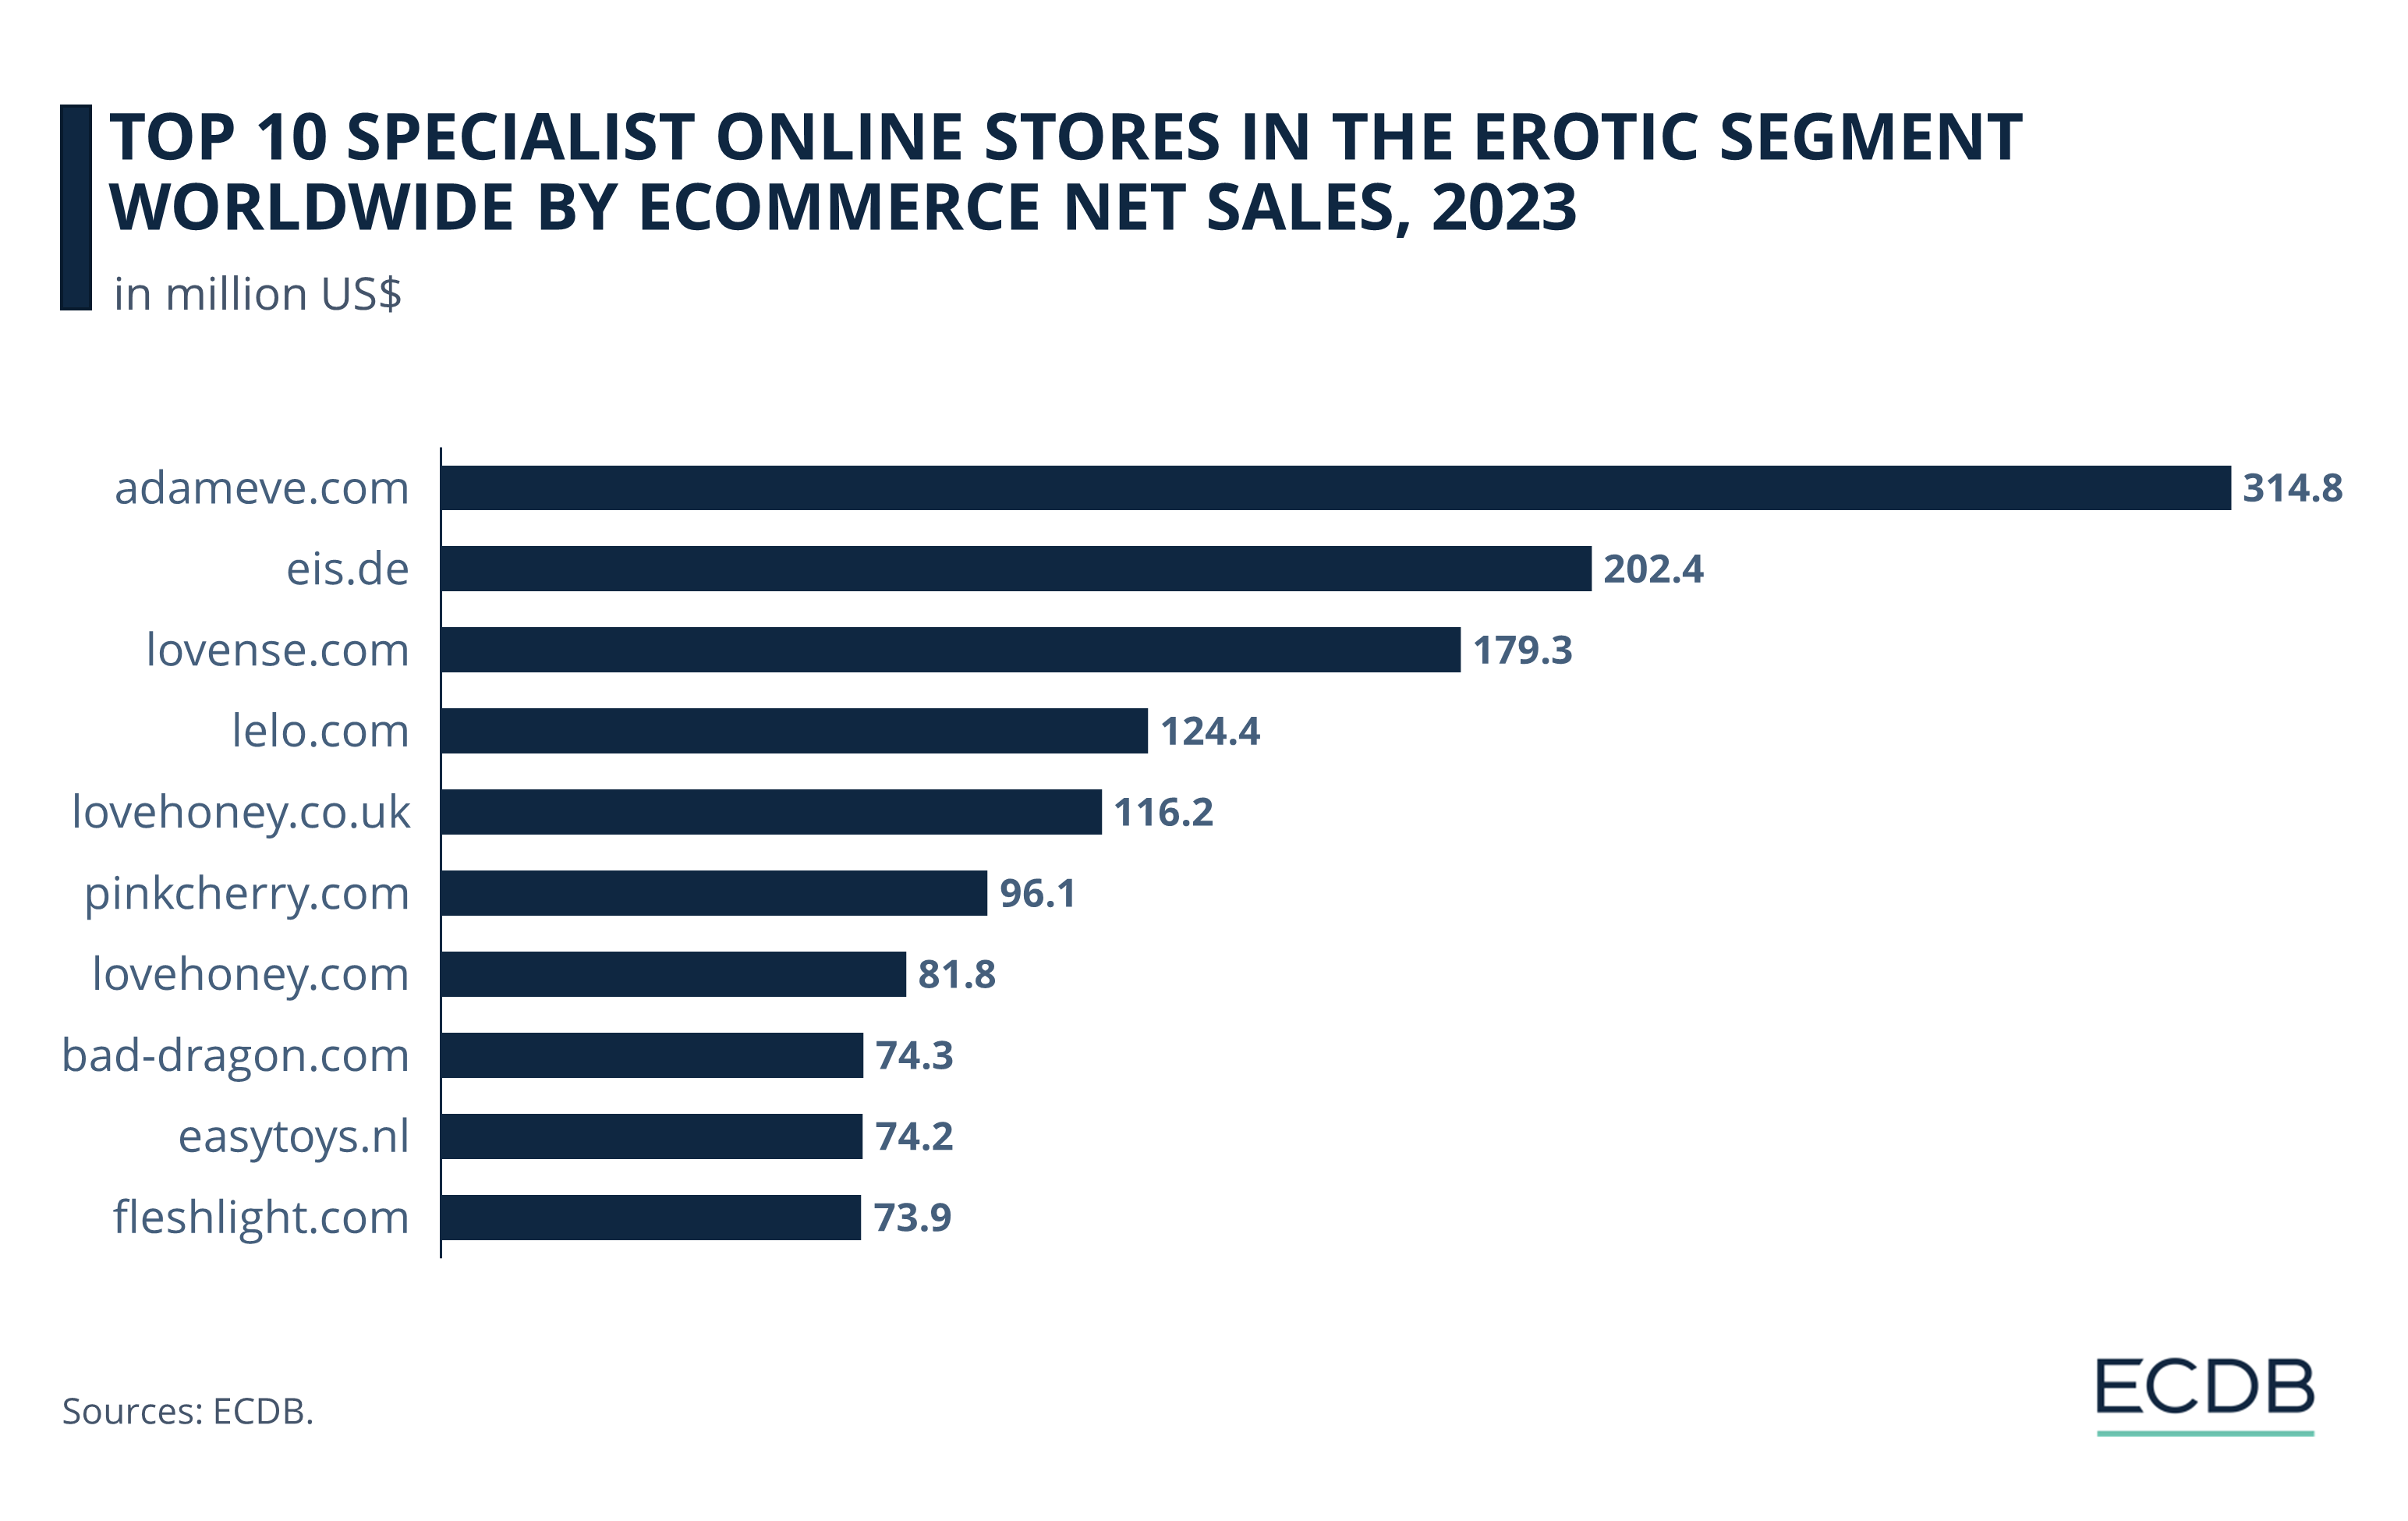 Top 10 Specialist Online Stores in the Erotic Segment Worldwide by eCommerce Net Sales, 2023